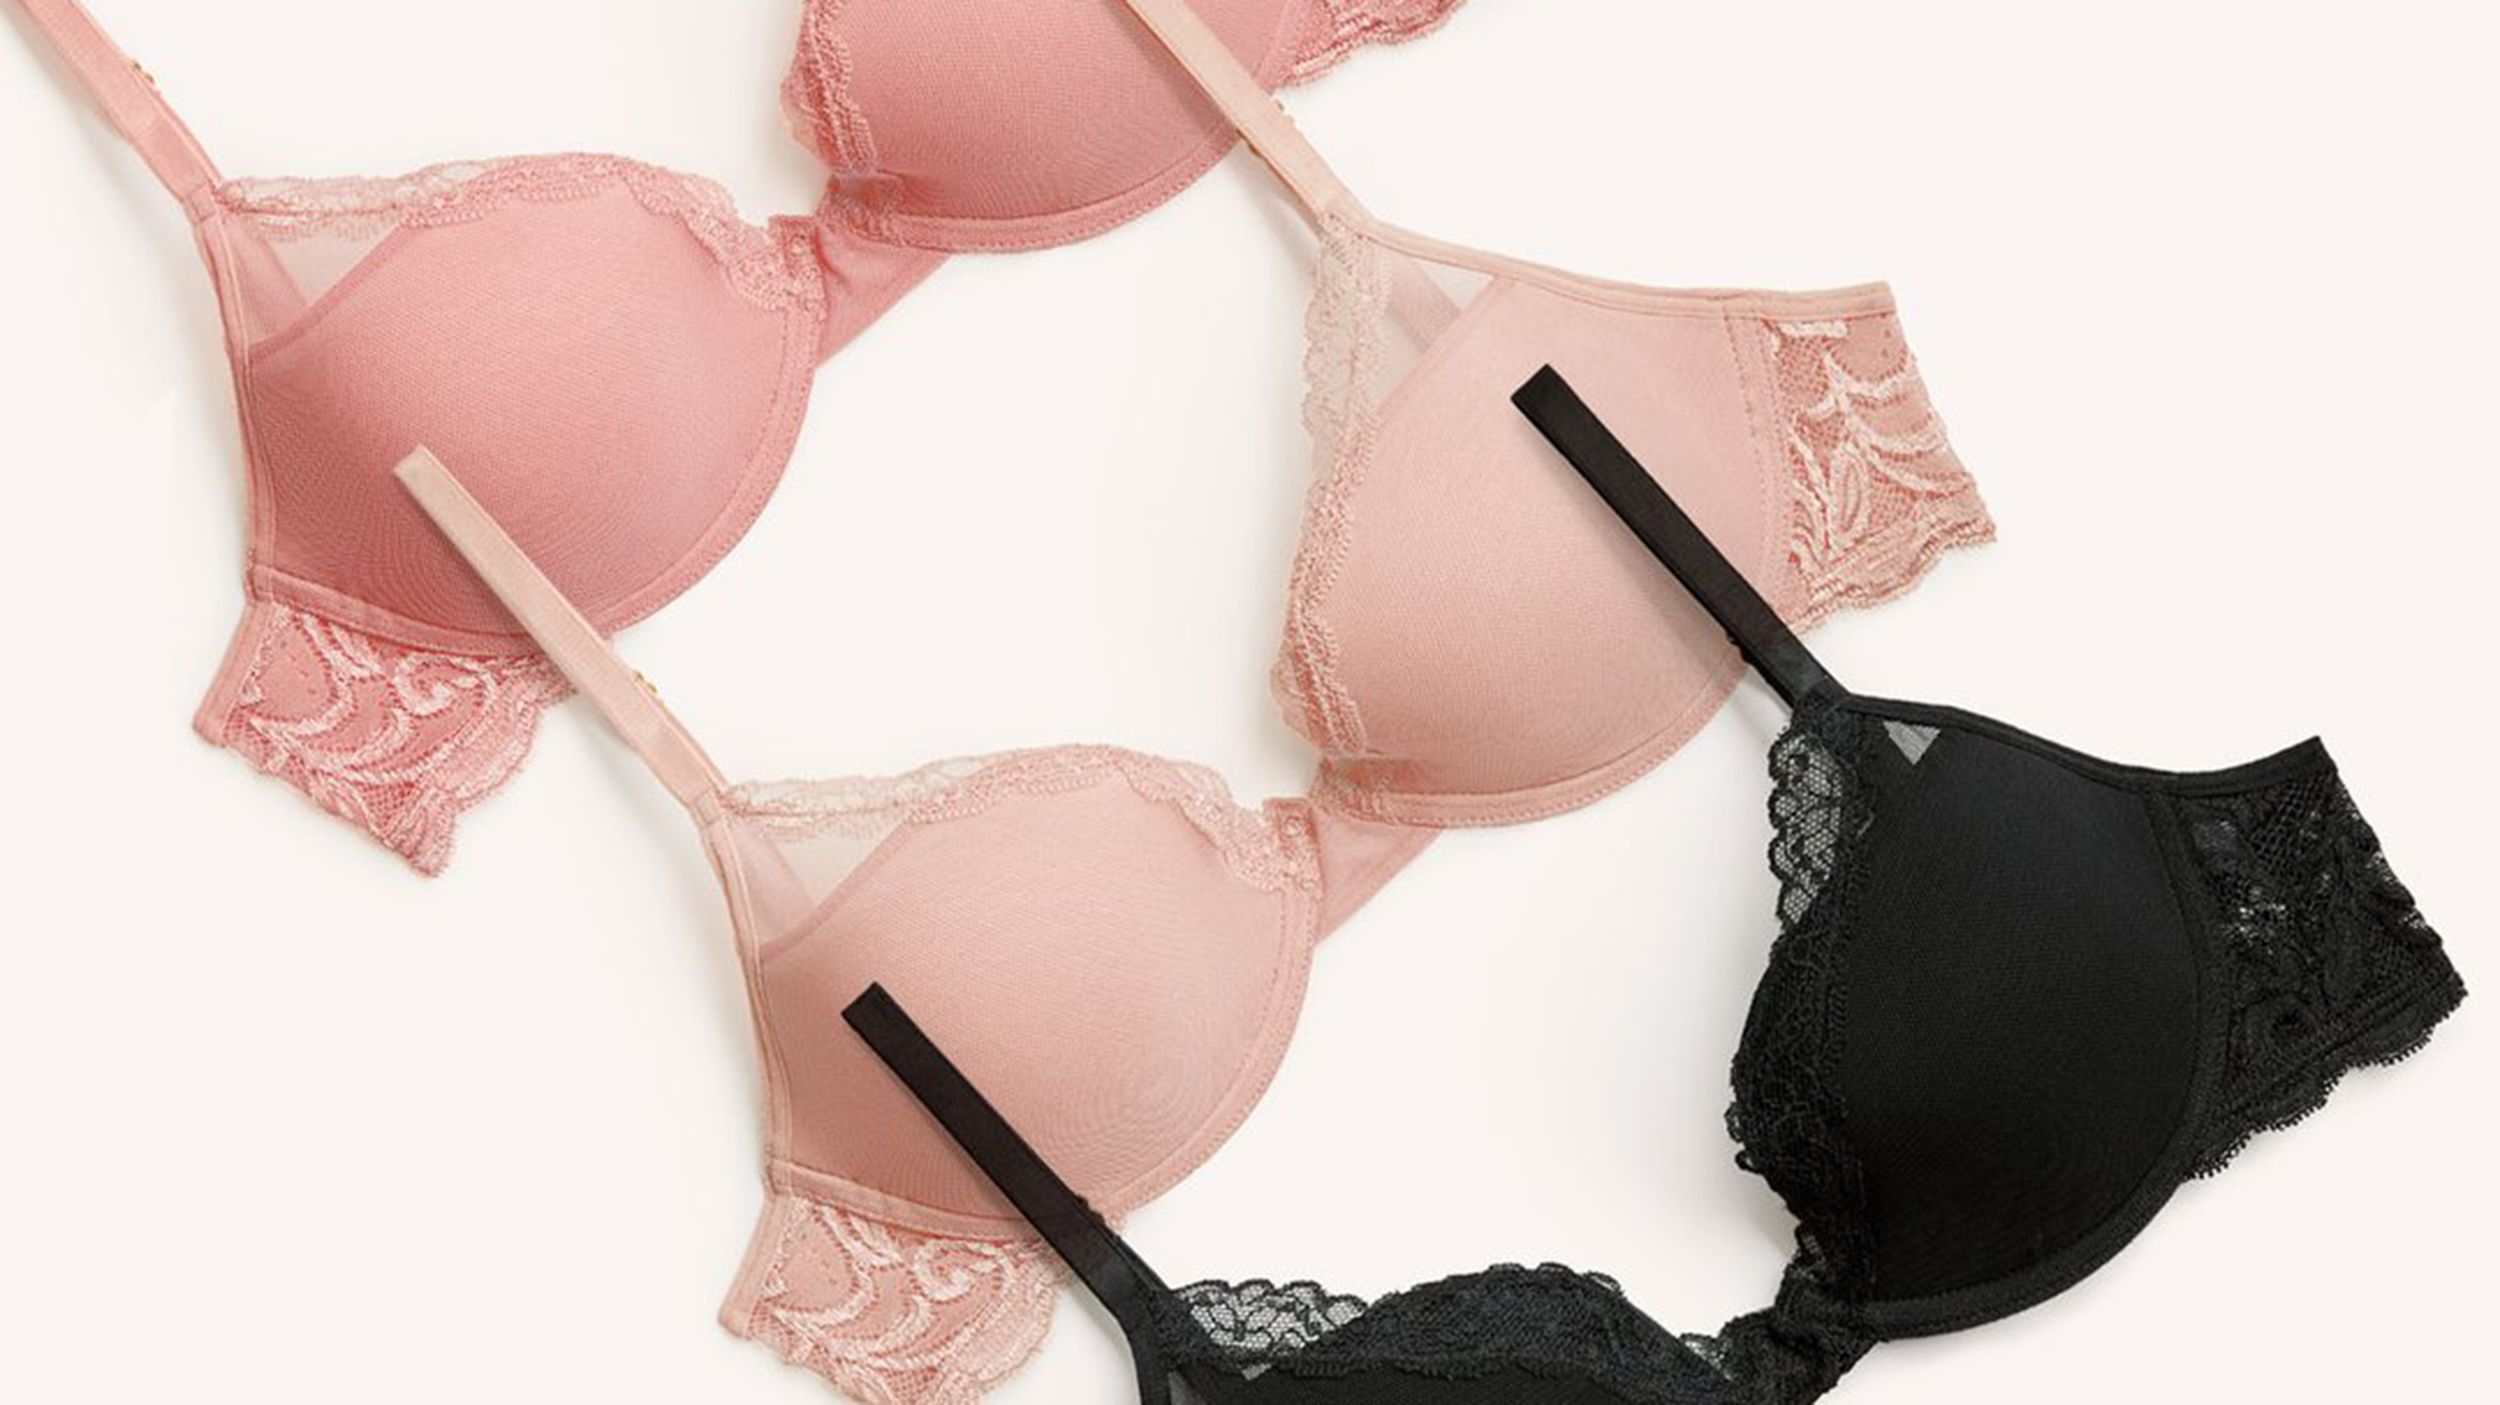 Pepper Bras Claim They're Designed to Perfectly Fit Small Boobs